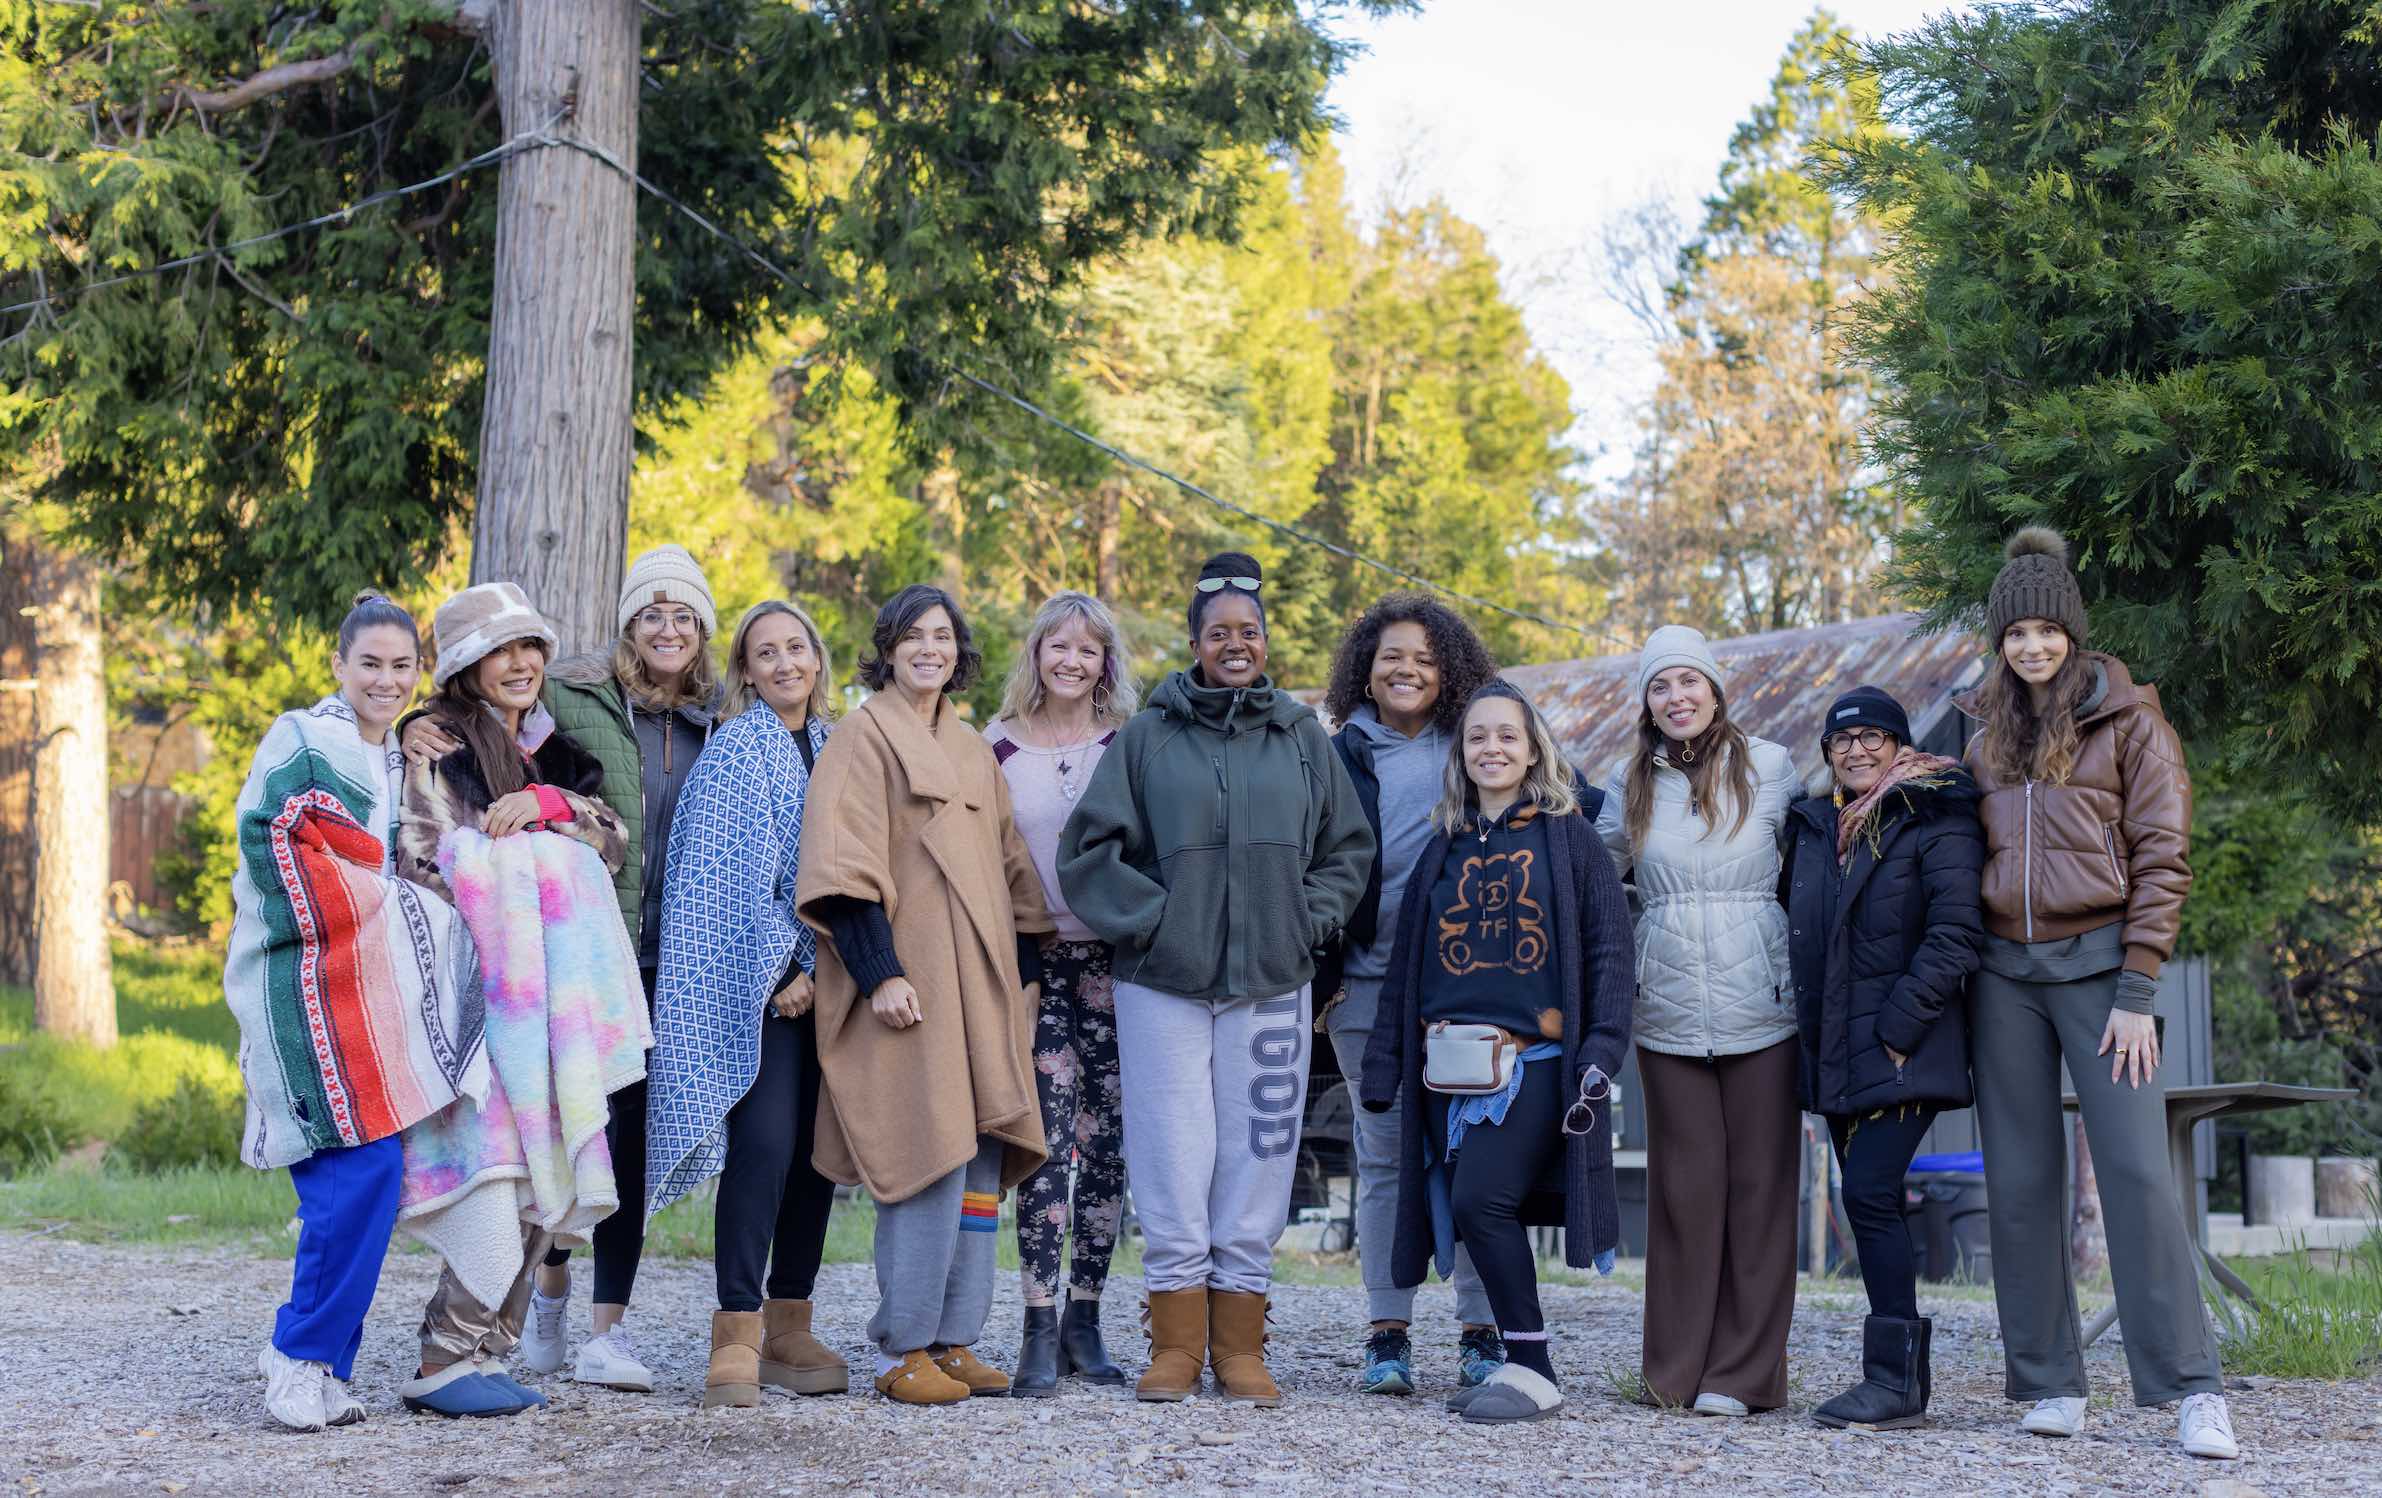 An image of a group of women during their women's wellness in the woods retreat at The Perch.